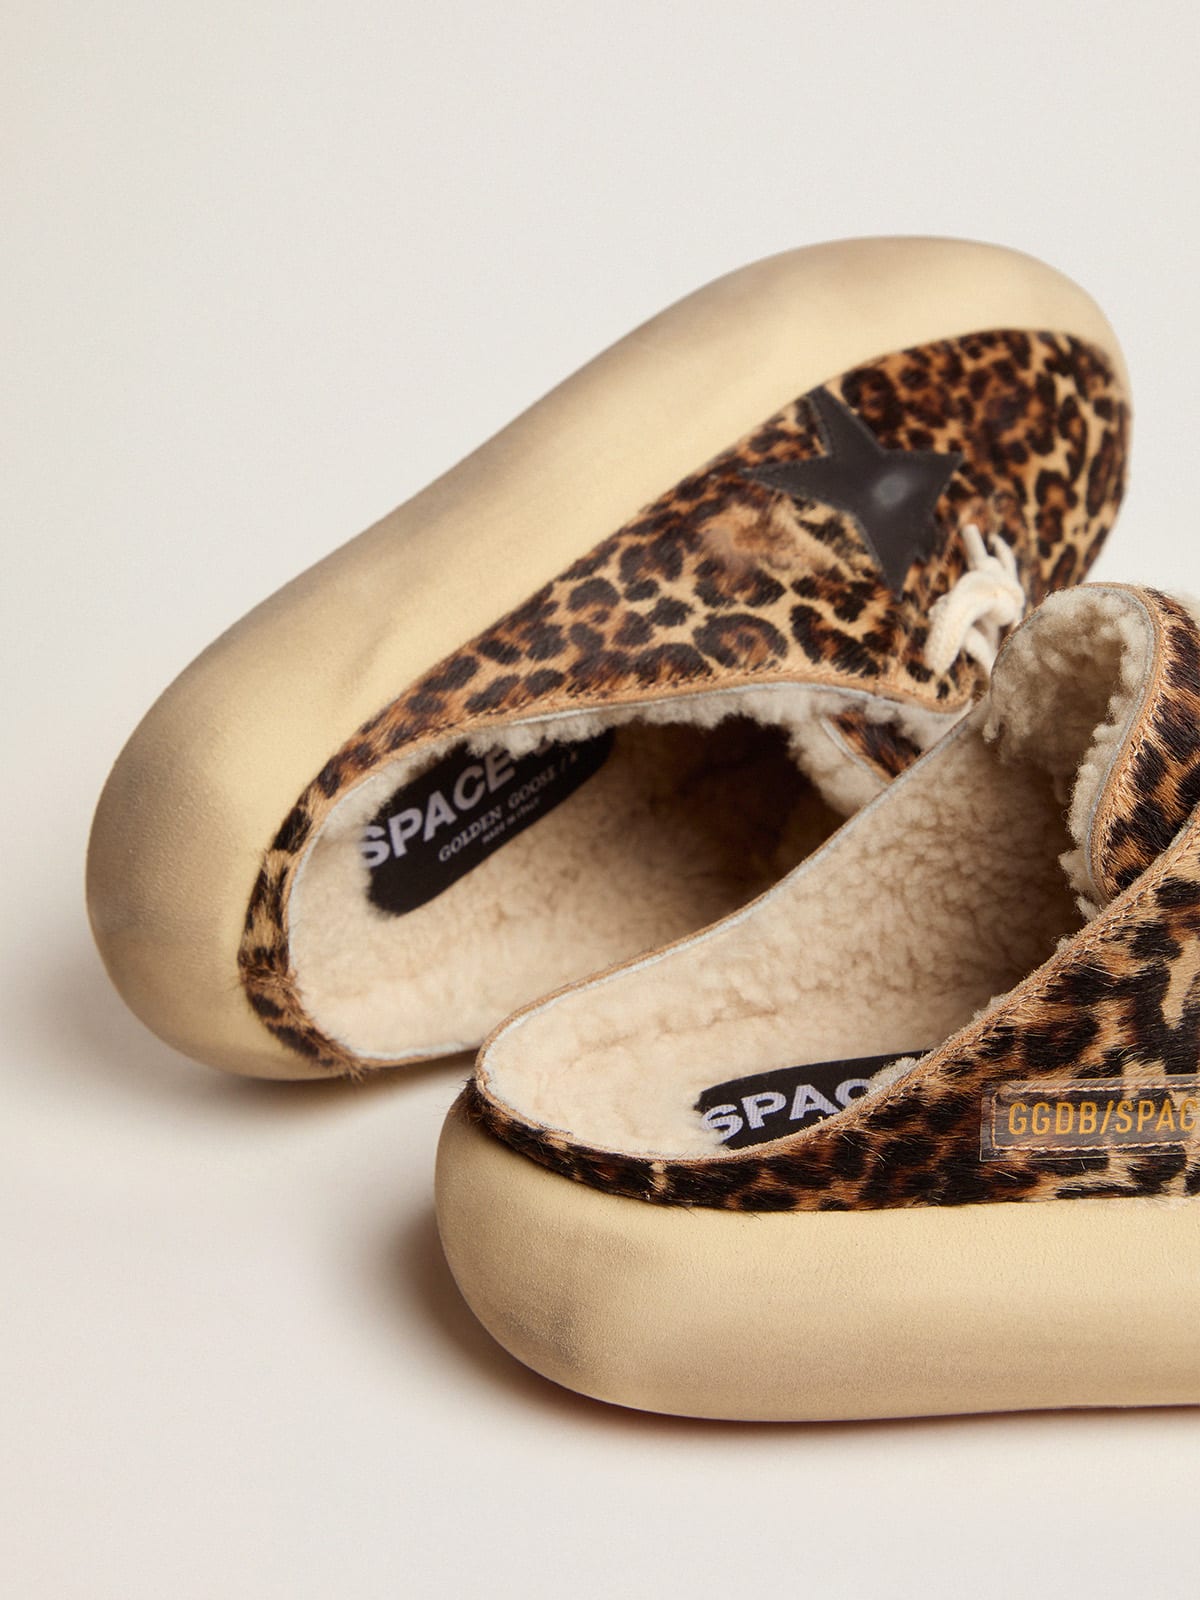 Golden Goose - Space-Star Sabot shoes in animal-print pony skin with shearling lining in 